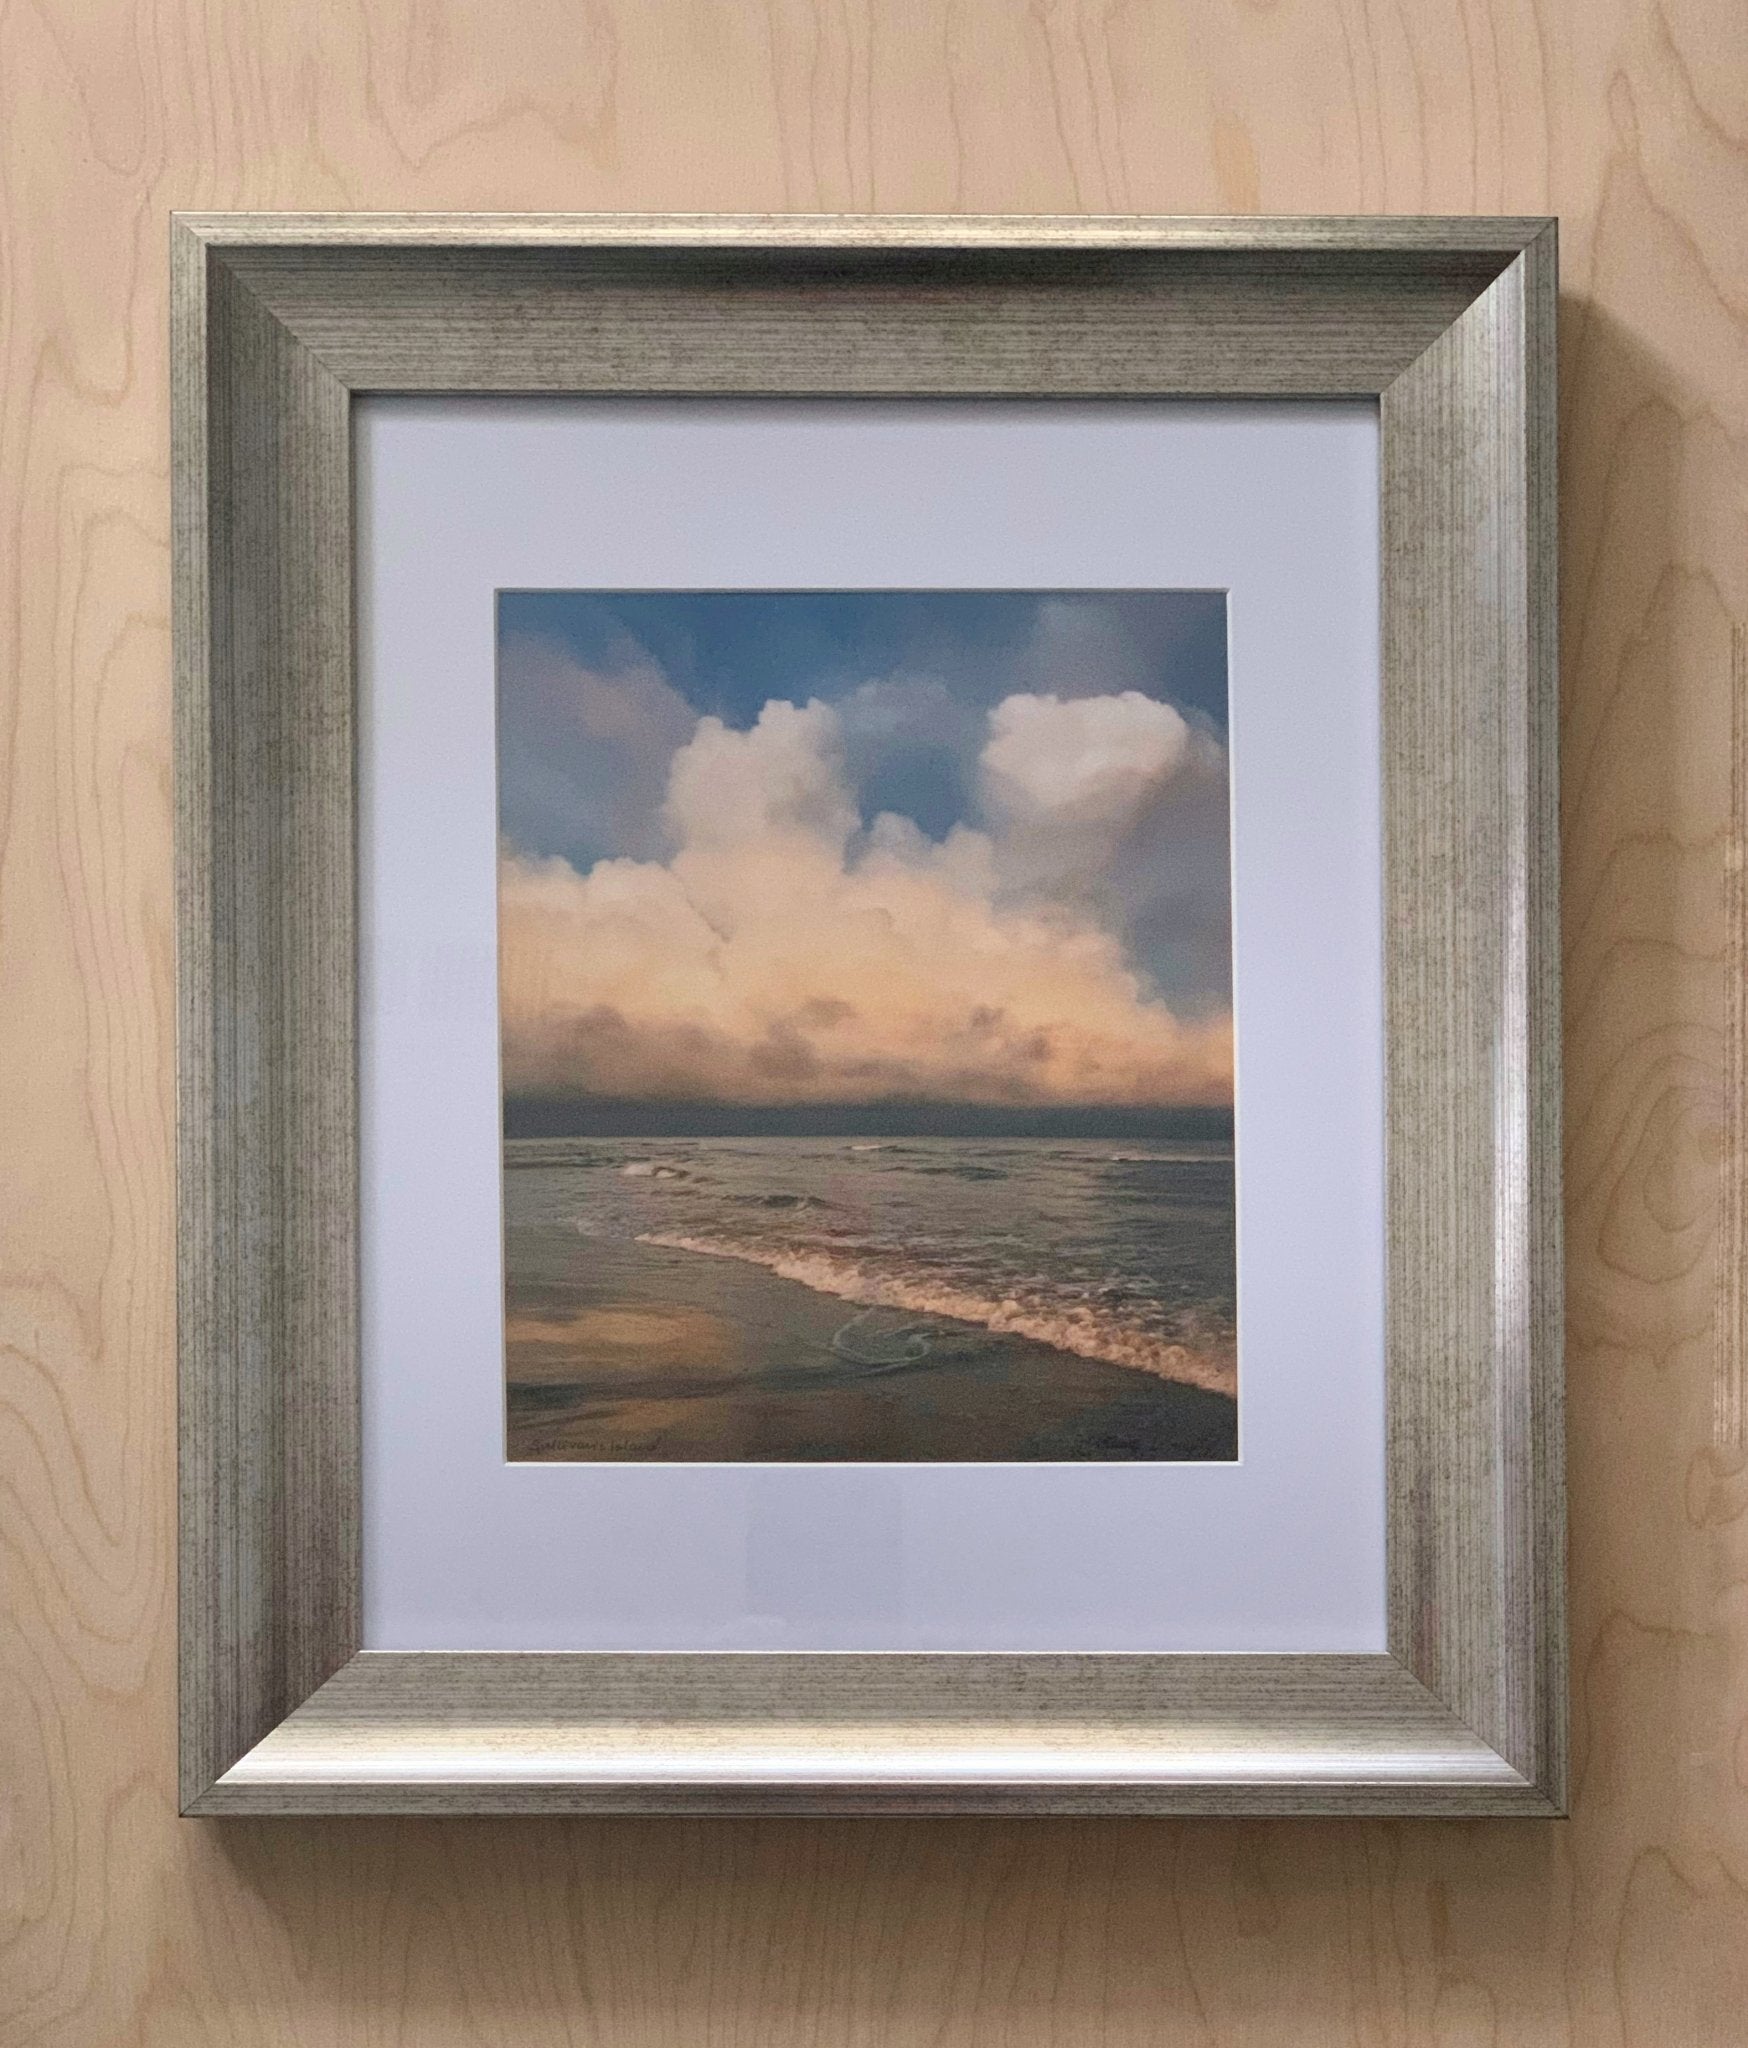 Jackie Levesque Photography: "Golden Clouds on Beach" - Essentially Charleston